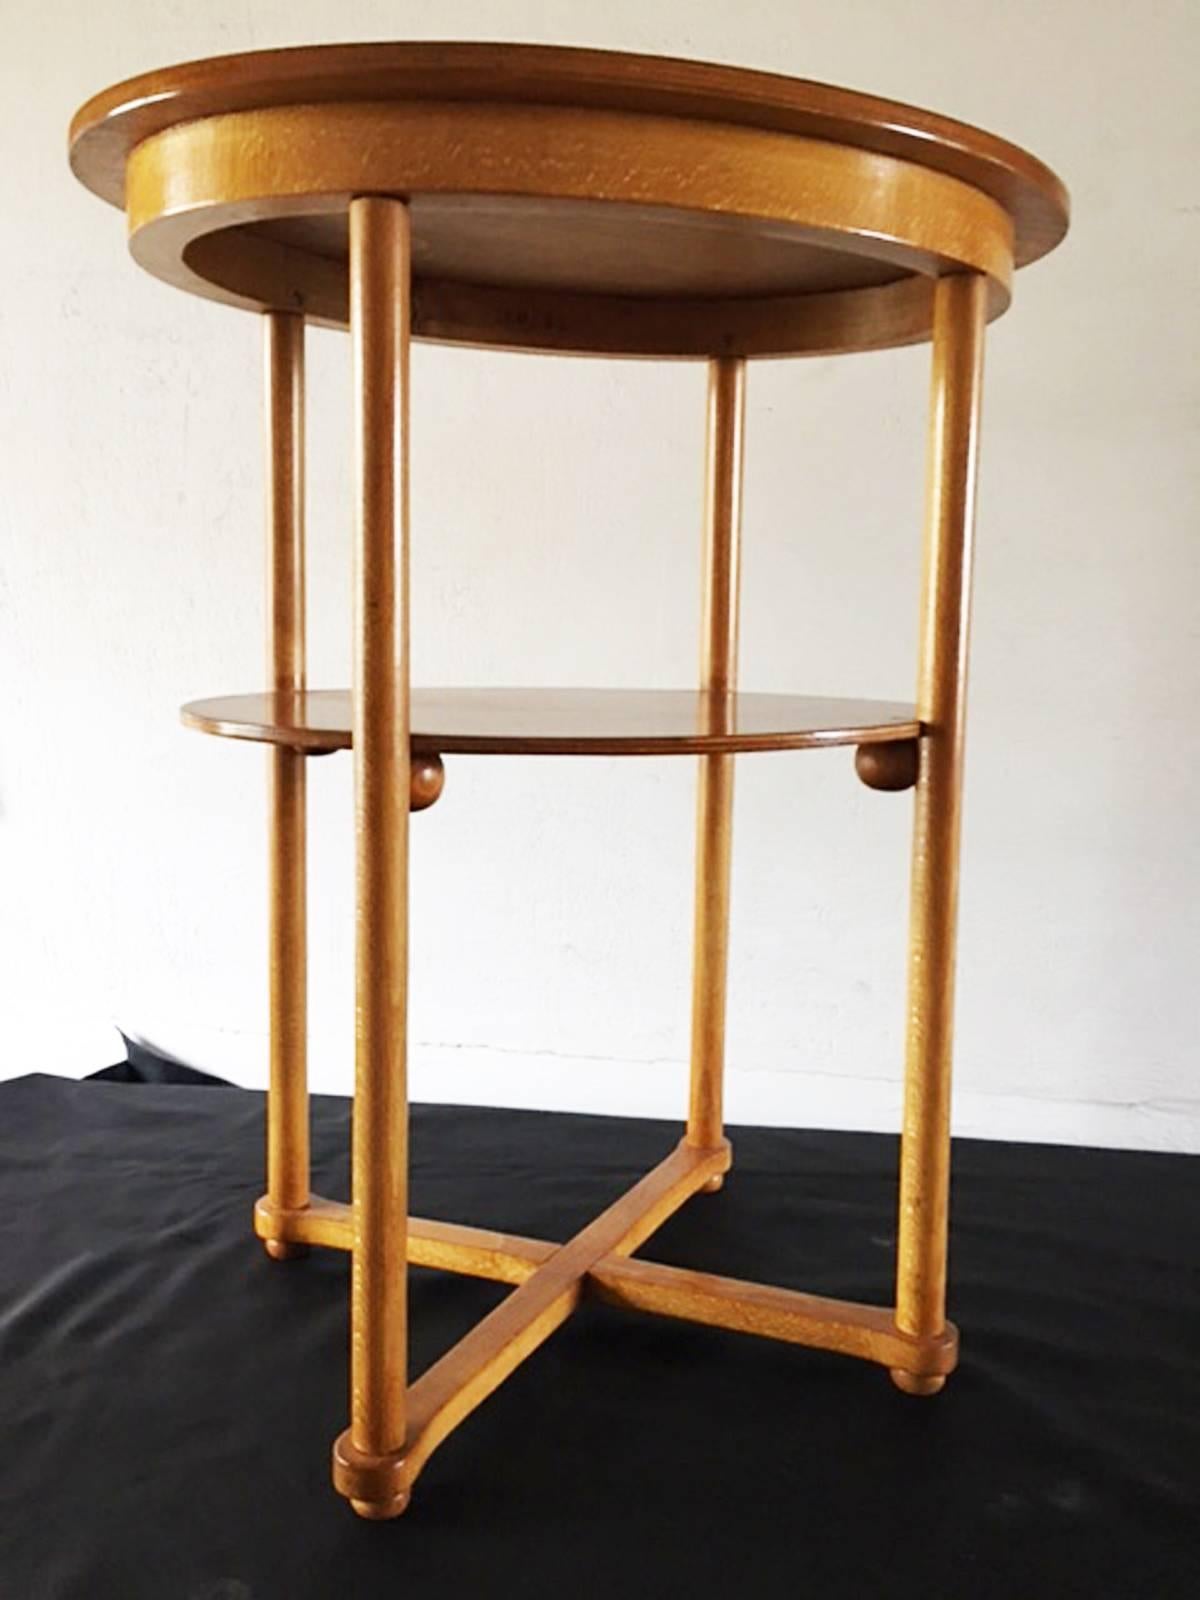 Vienna Secession Thonet Side Table by Josef Hoffmann